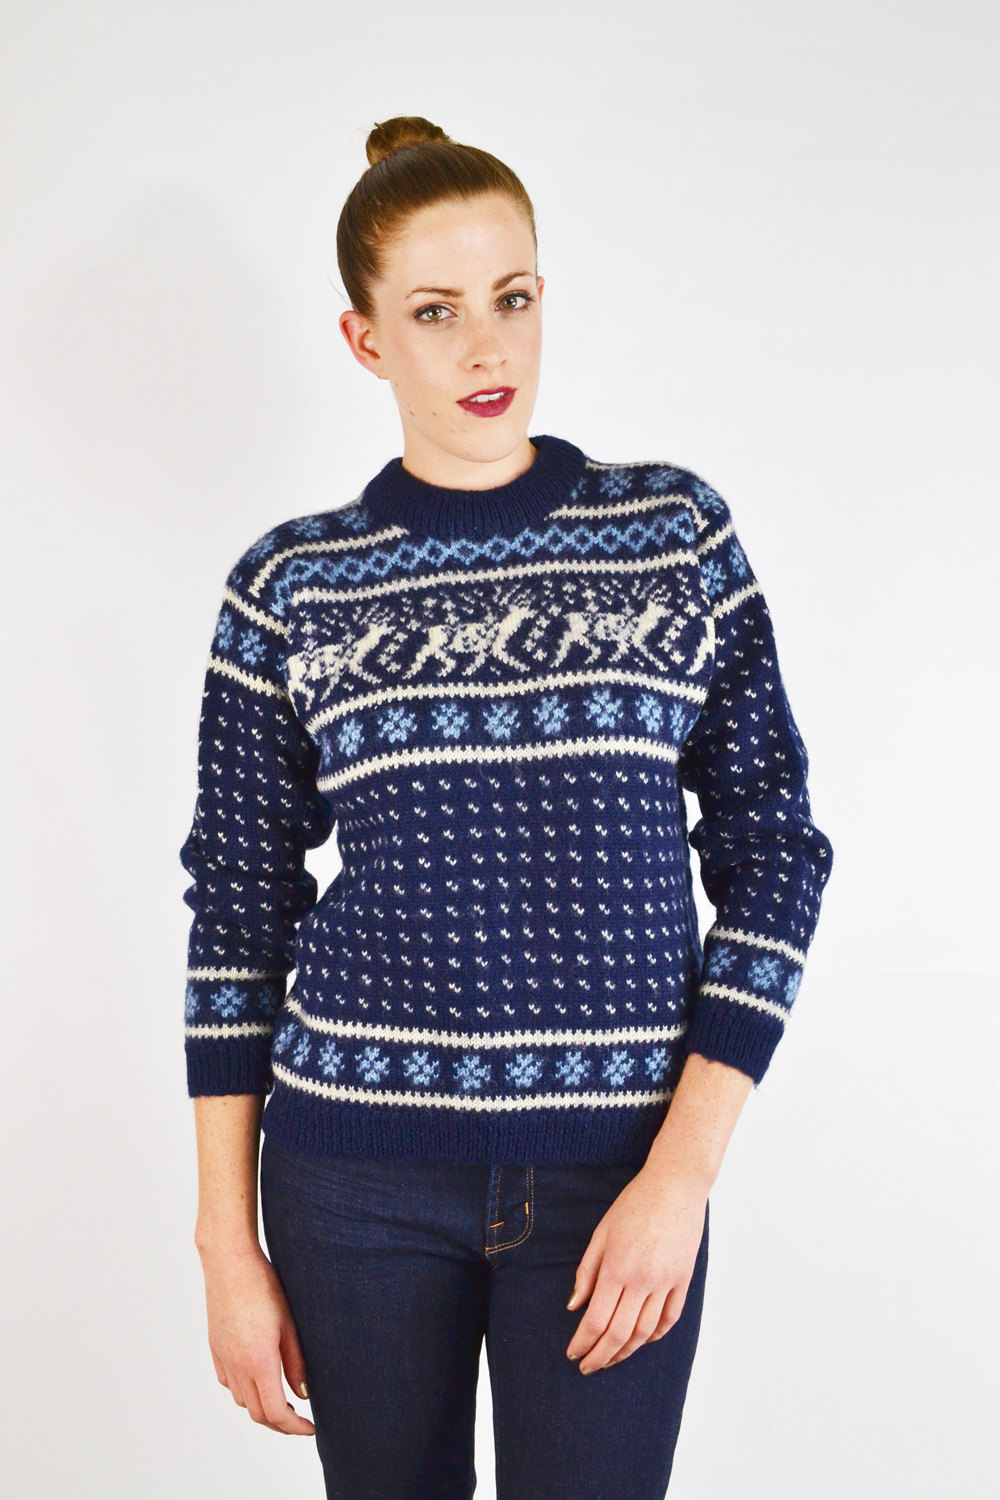 80s dale of norway sweater, blue fair isle sweater, blue fairisle sweater, blue nordic sweater, blue ski sweater, reindeer snowflake by trashyvintage